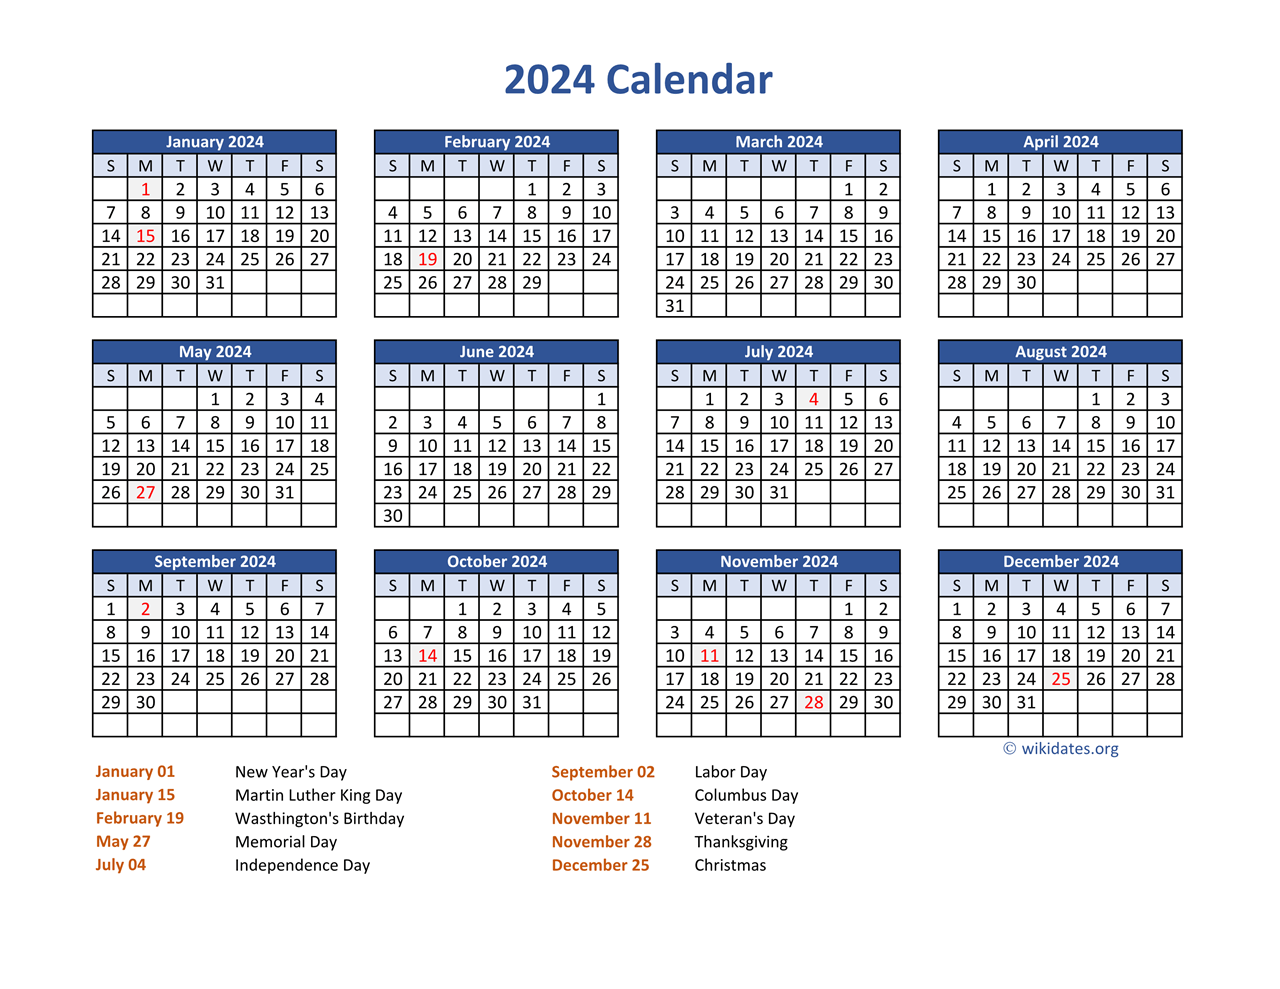 Pdf Calendar 2024 With Federal Holidays | Wikidates for 2024 Calendar Printable Free With Holidays